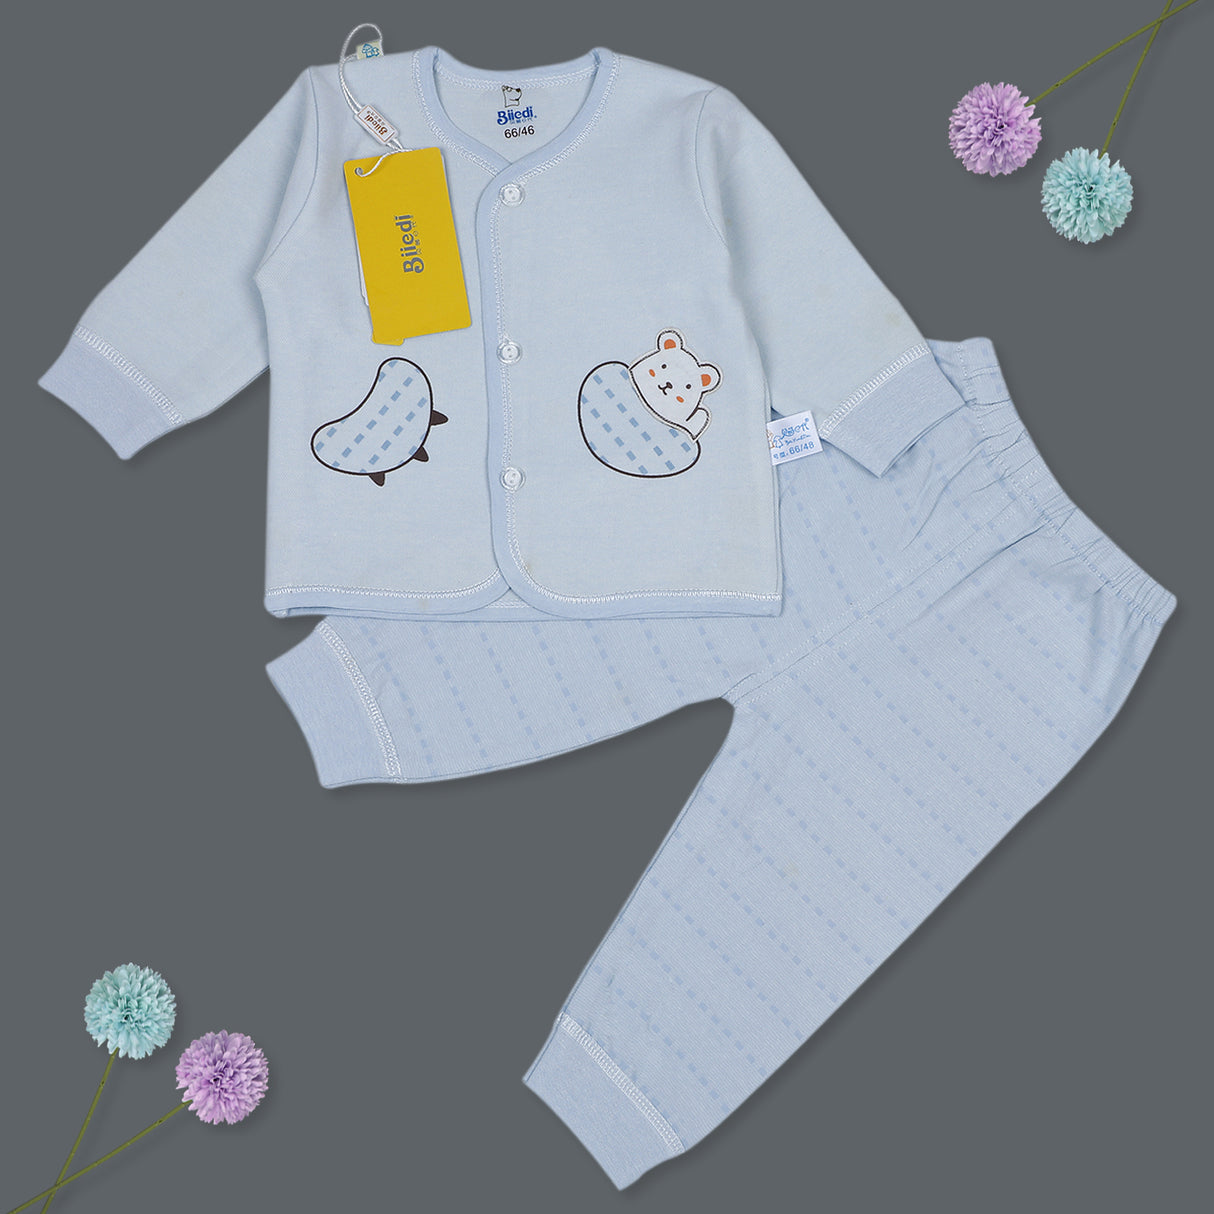 Bathing Teddy Bear Full Sleeves Top And Pyjama Buttoned Night Suit